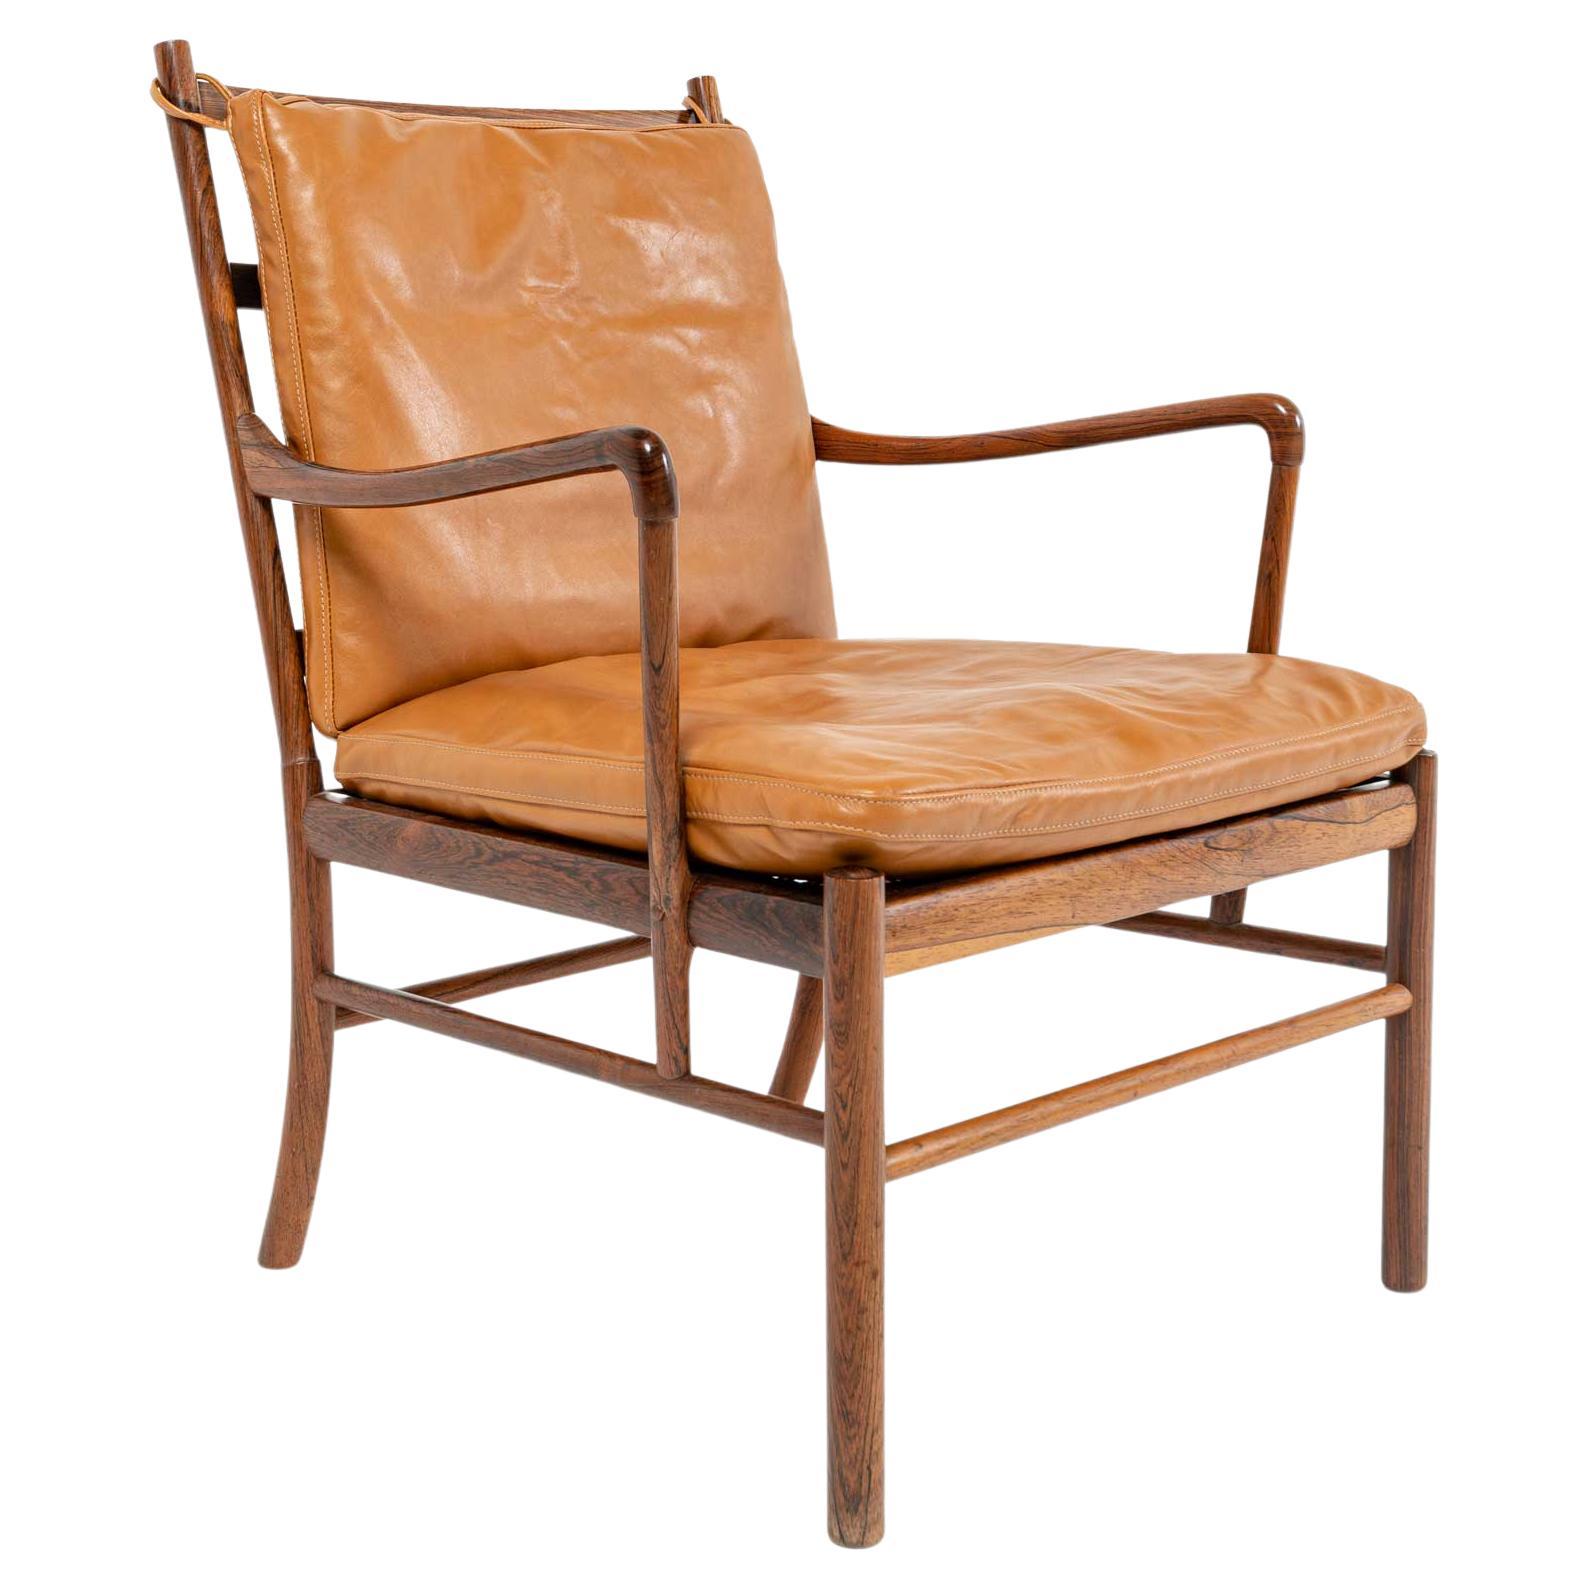 Ole Wanscher's Colonial Chair in Rosewood with Maharam Sorghum Brown Cushions